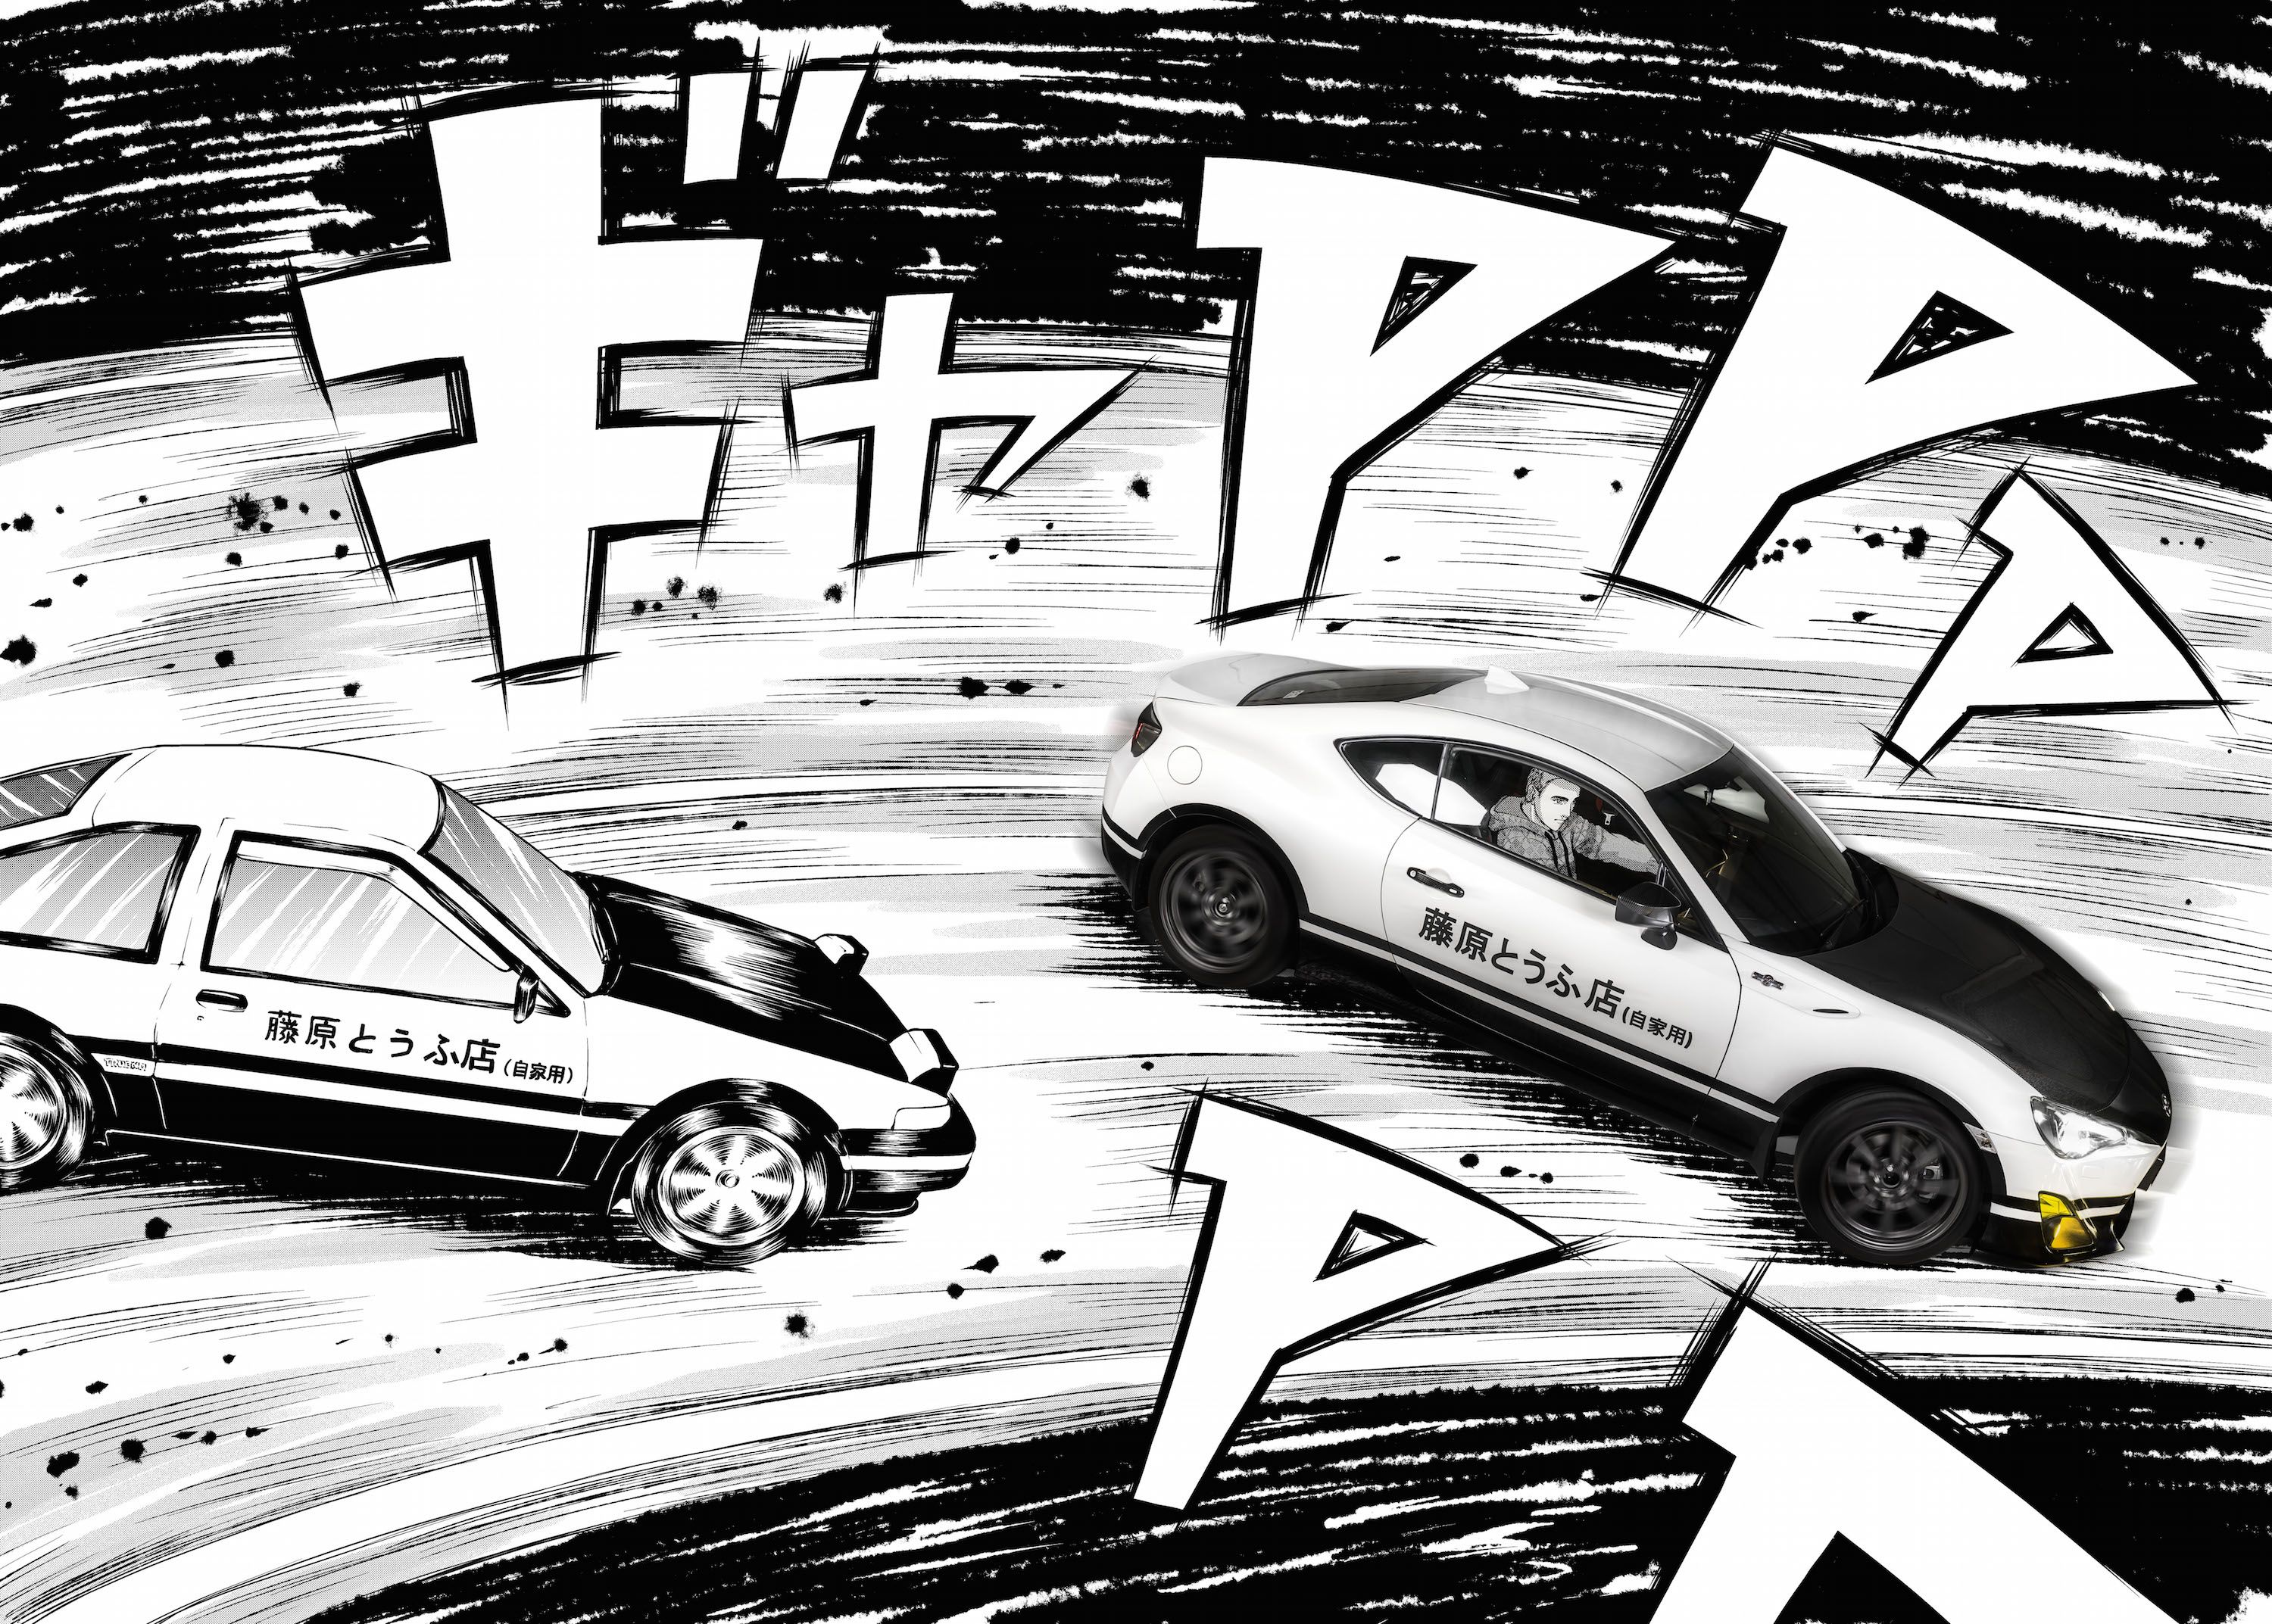 The Toyota GT86 Initial D Concept Is An Awesome Car Based Manga